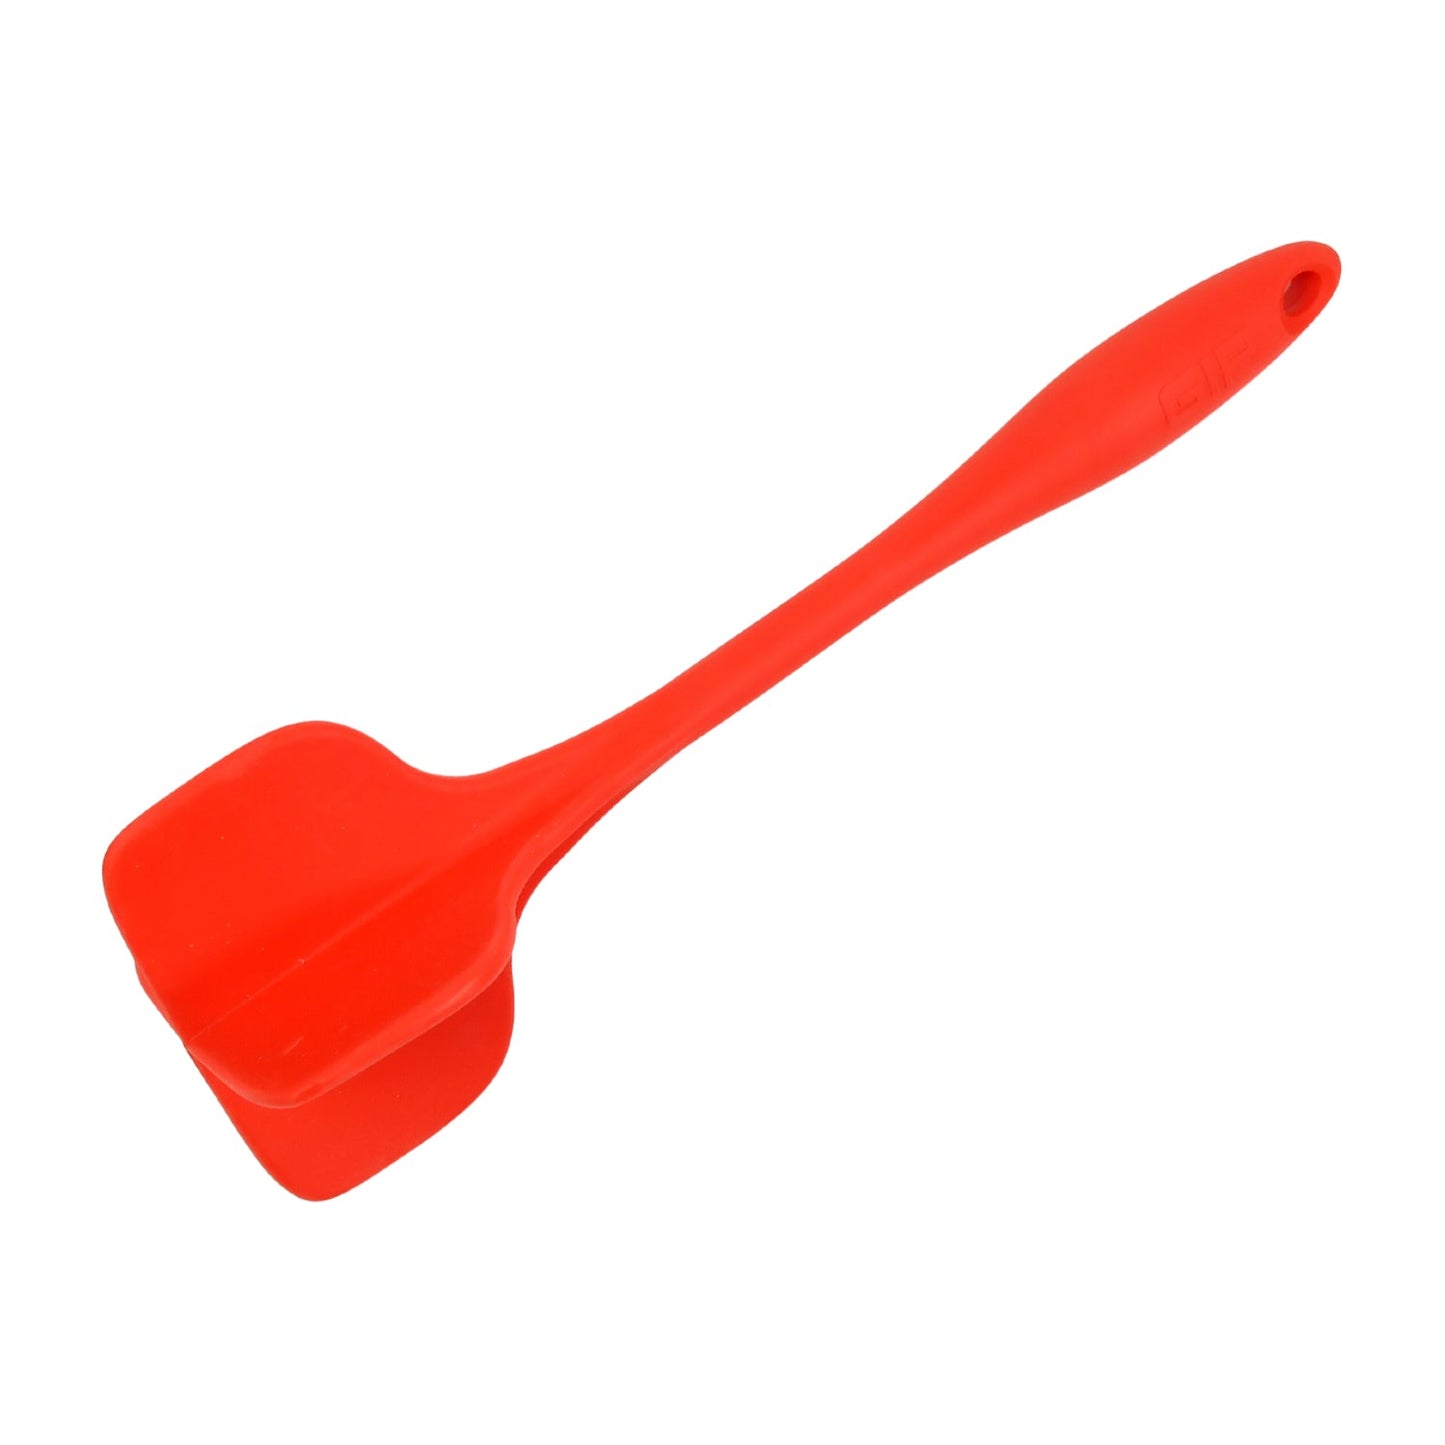 Silicone Mixer, Non-Stick Heat Resistant Kitchen Spatula Mixer - Perfect for Baking, Cooking, Scraping, and Mixing